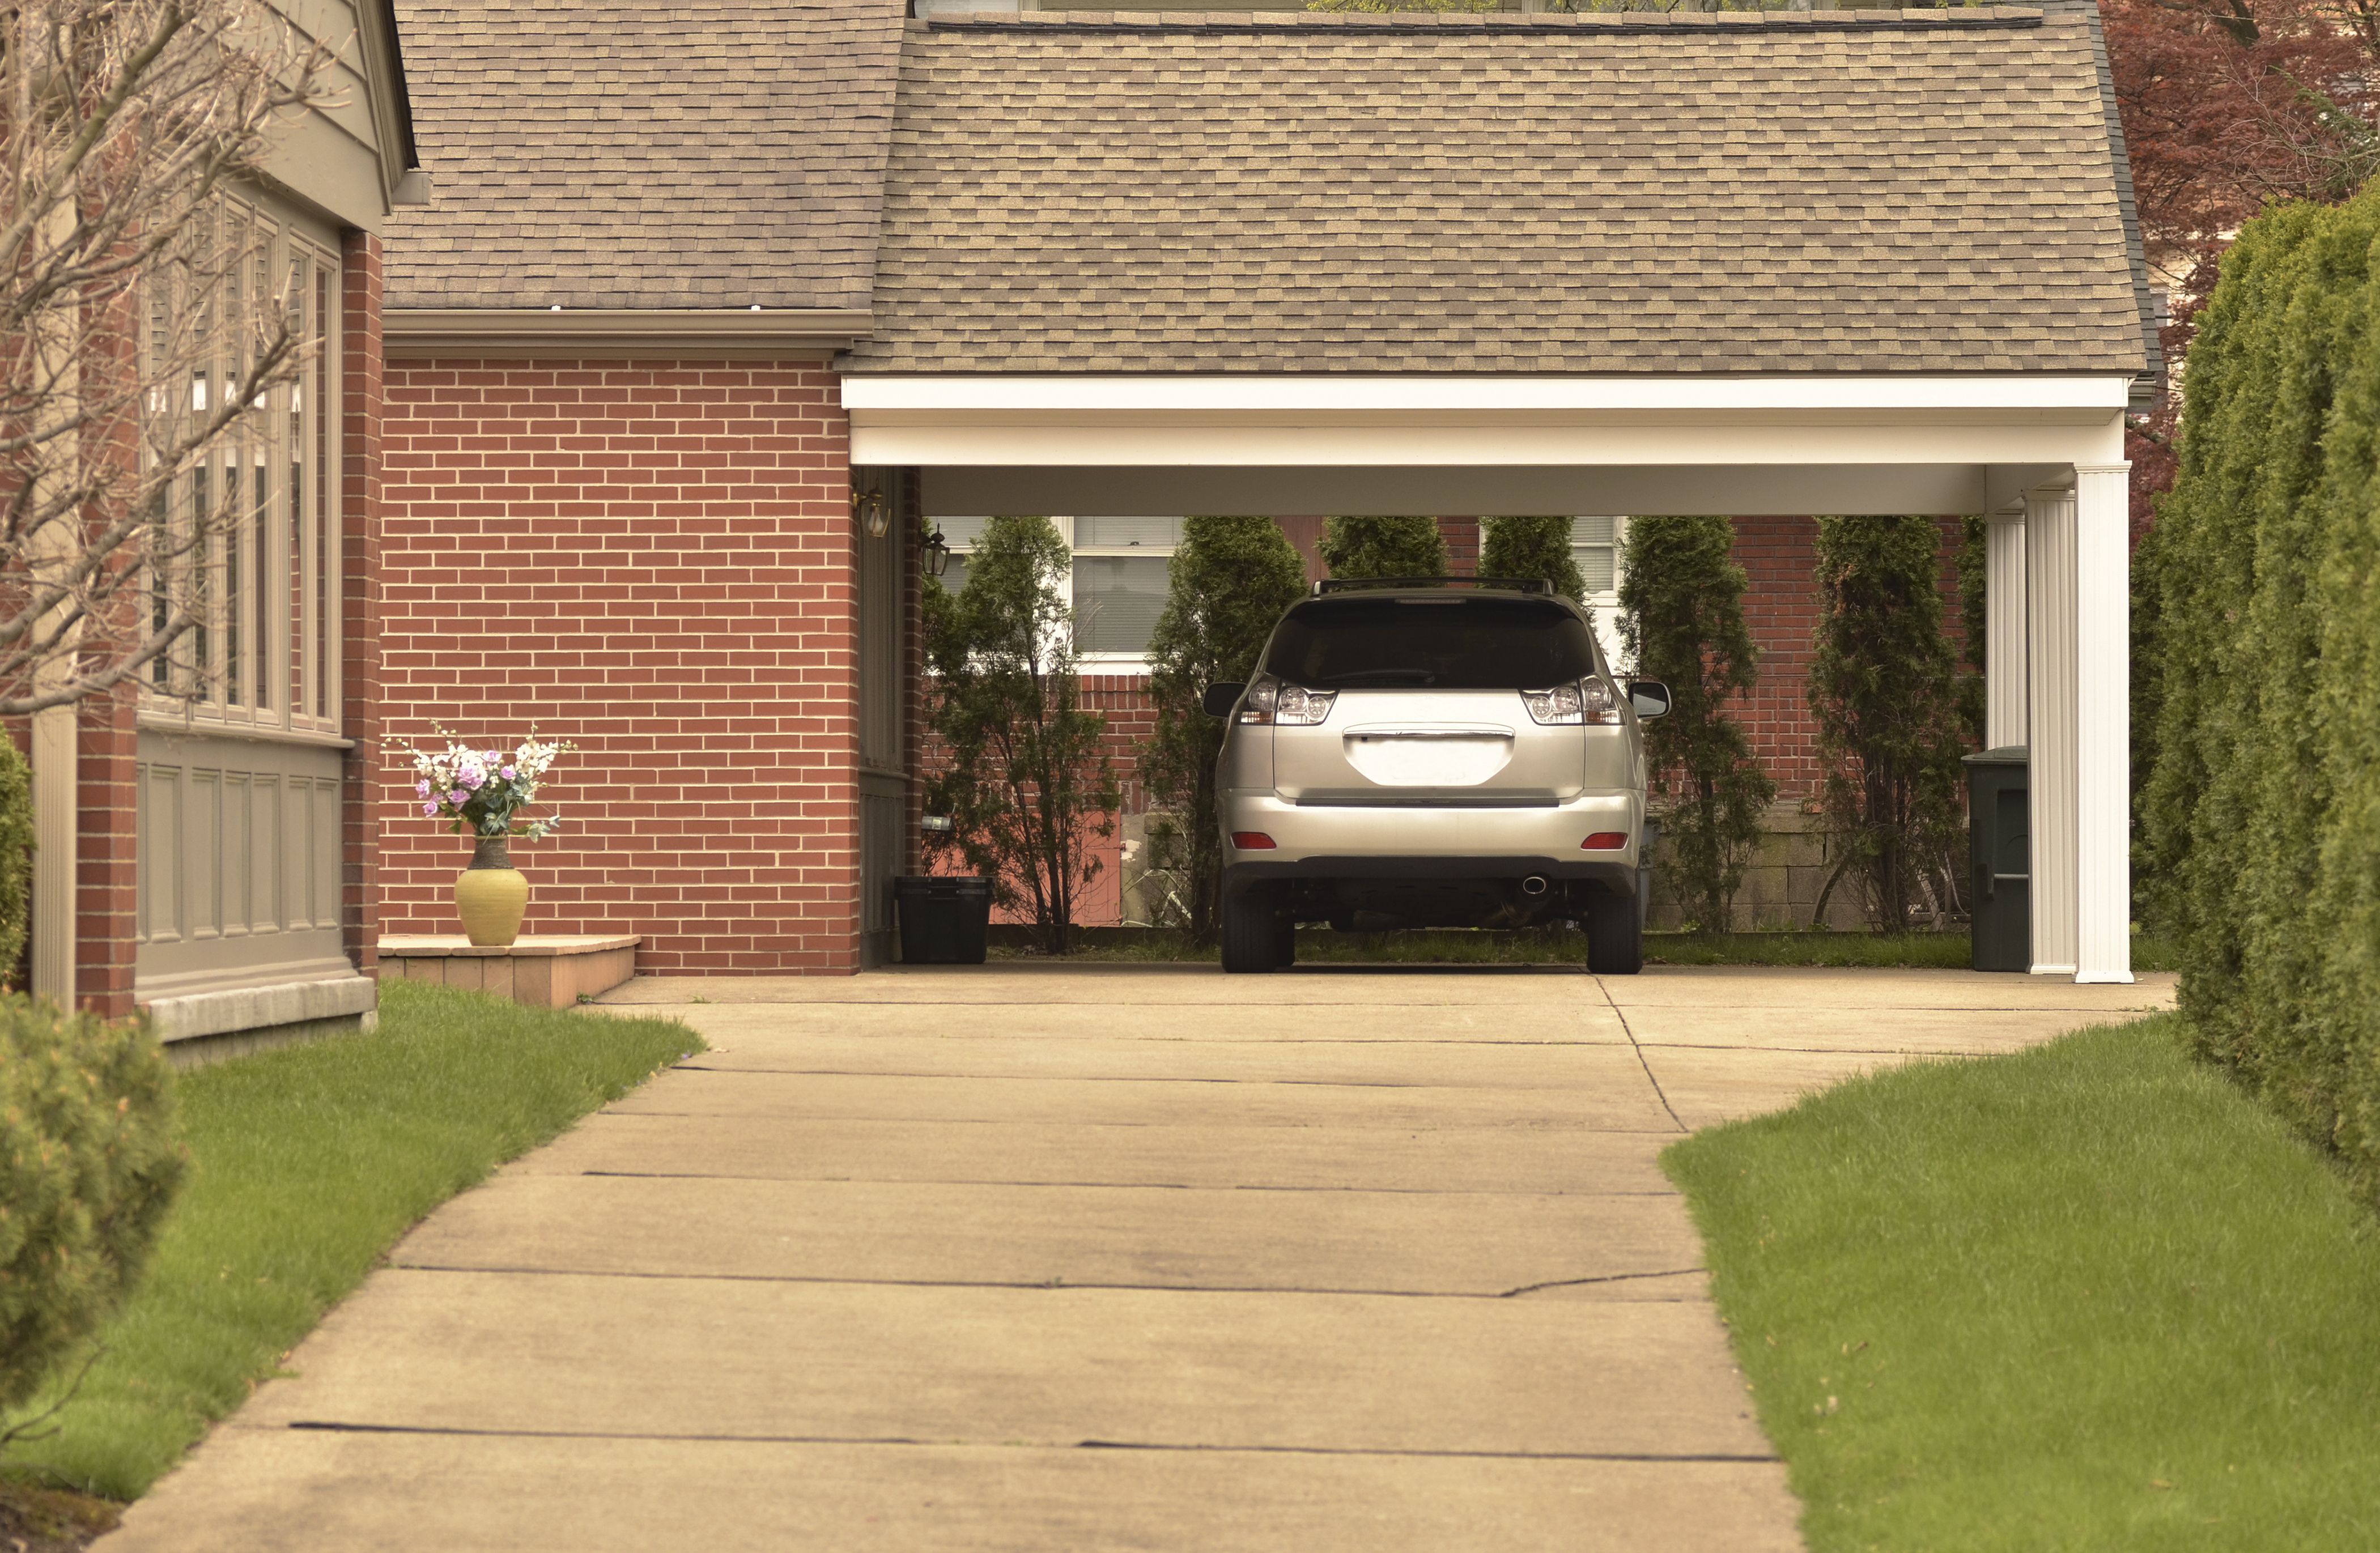 A Checklist for Converting a Carport to a Garage